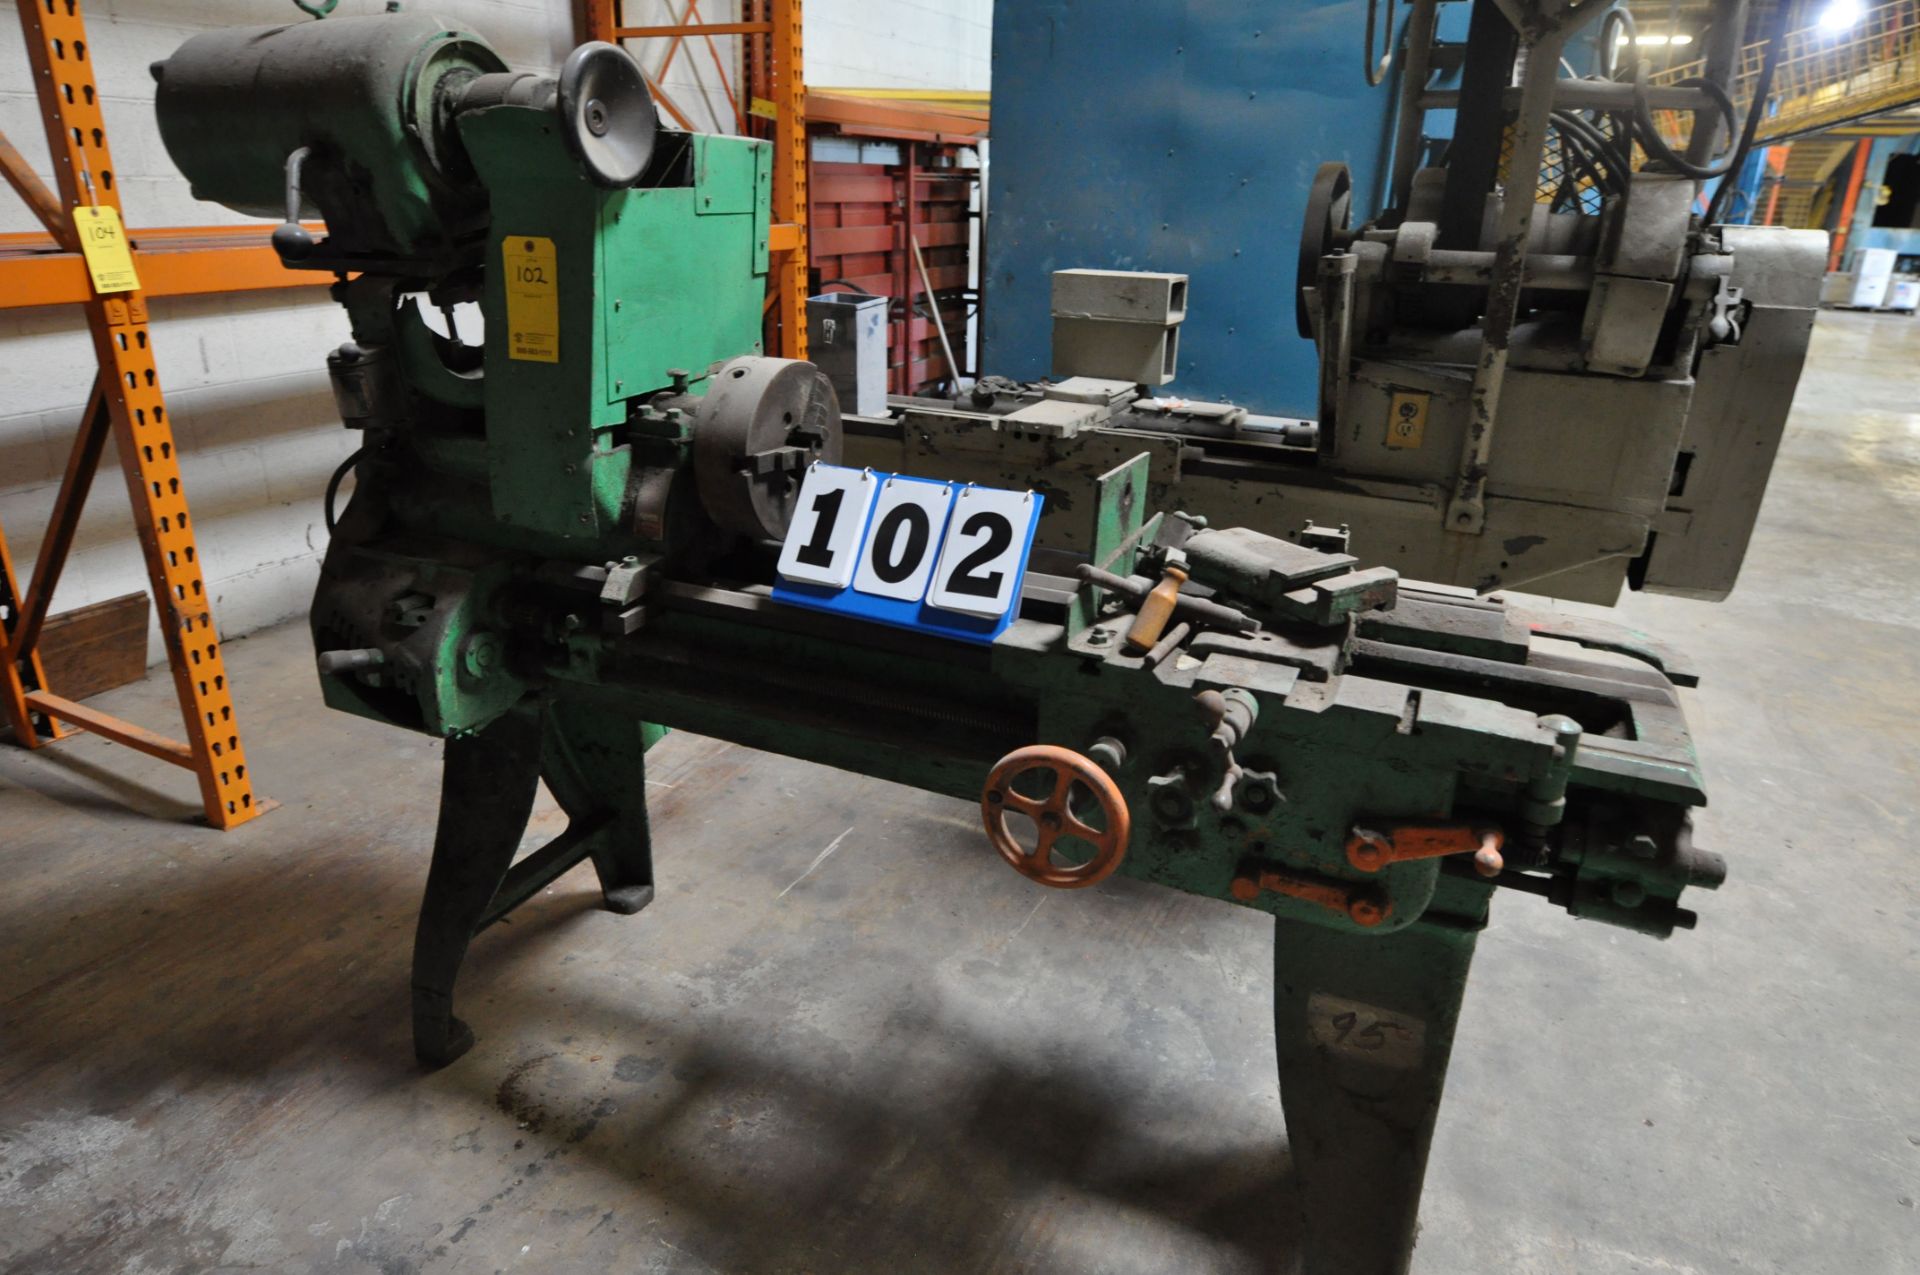 Engine Lathe 3' weighs, 10" 3 Jaw chuck